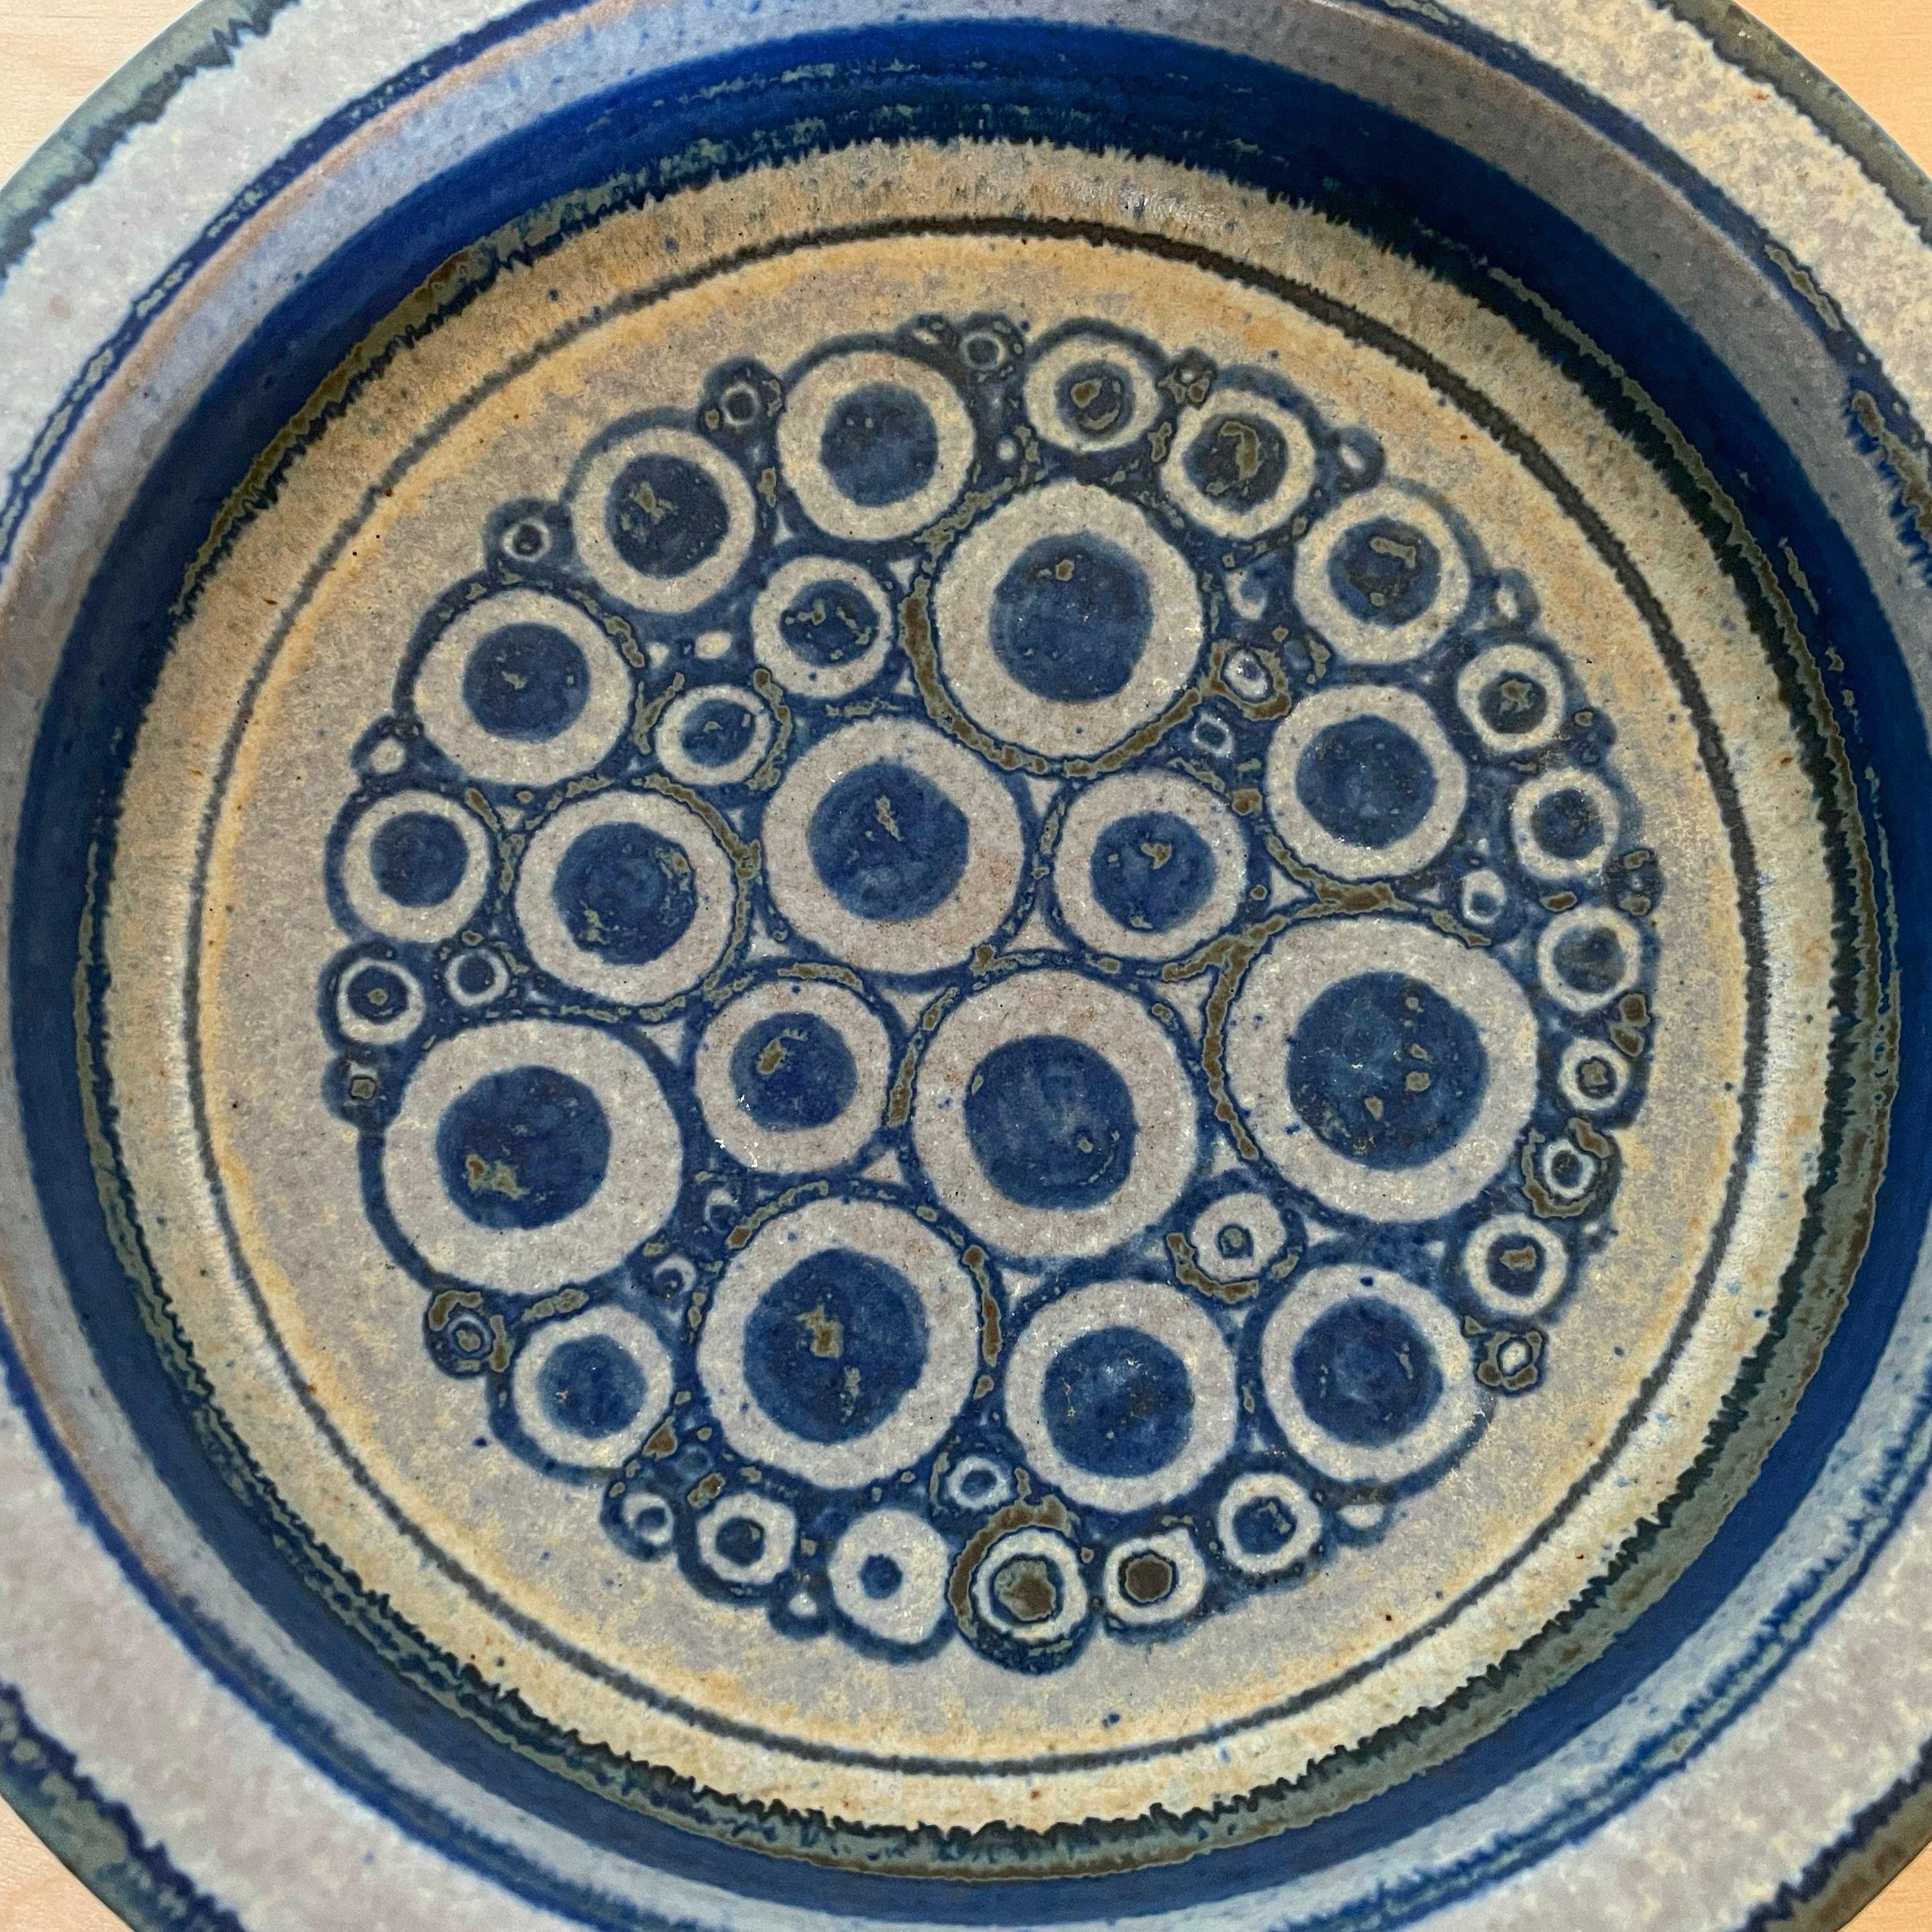 Hand painted blue and gray ceramic bowl by Marianne Starck for Michael Andersen and Son. Michael Andersen and Son was founded in the 1880s on the island of Bornholm, Denmark. Starck was lead Ceramicist and Artistic Director from 1955 until its